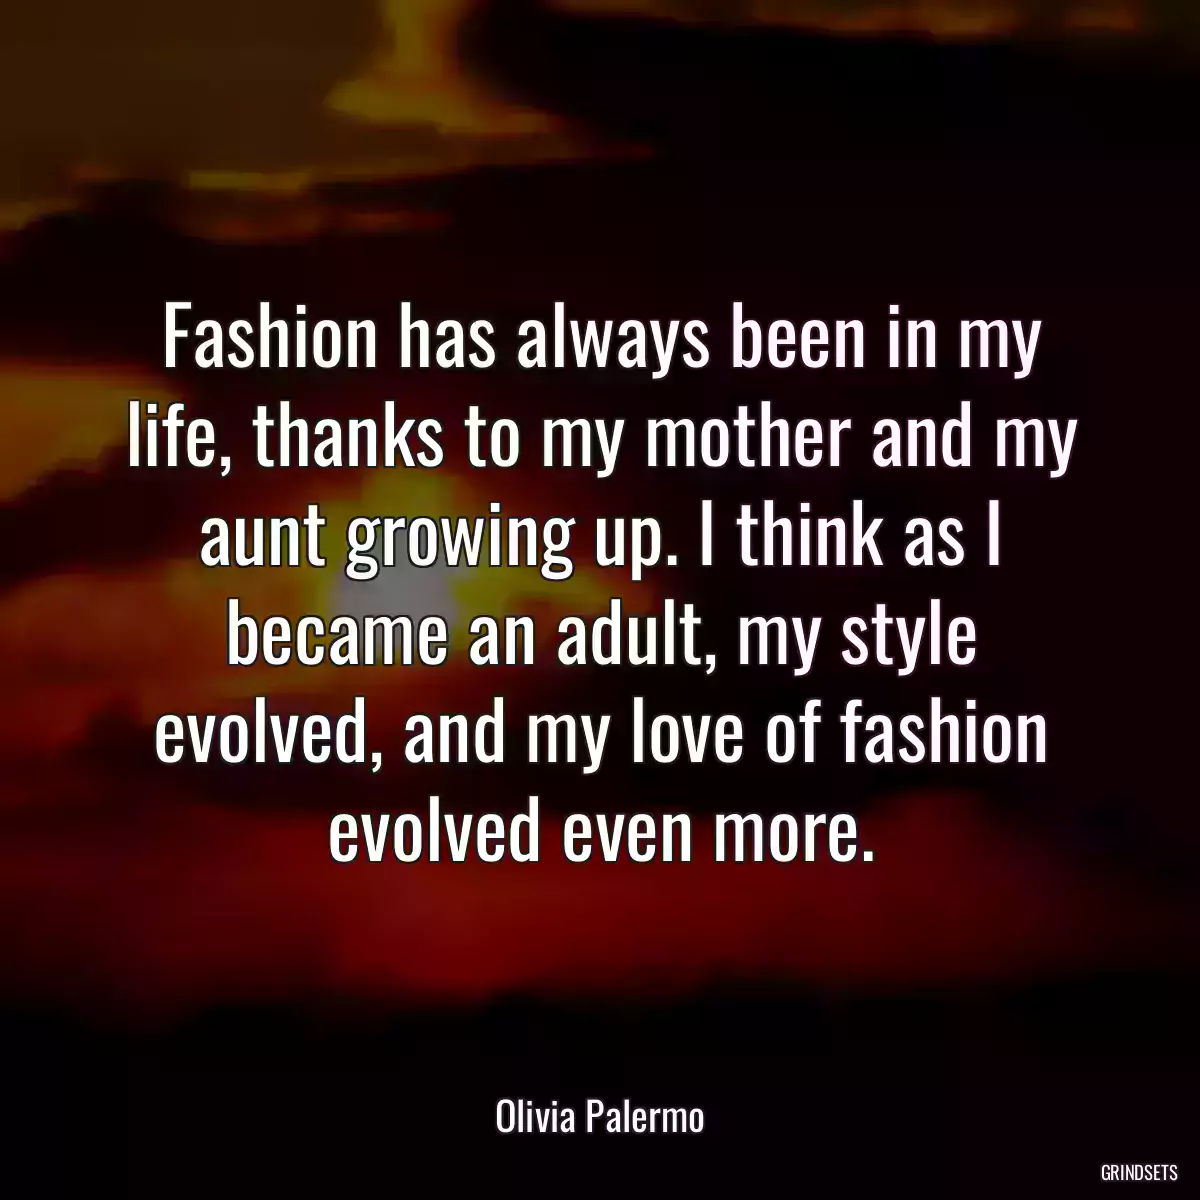 Fashion has always been in my life, thanks to my mother and my aunt growing up. I think as I became an adult, my style evolved, and my love of fashion evolved even more.